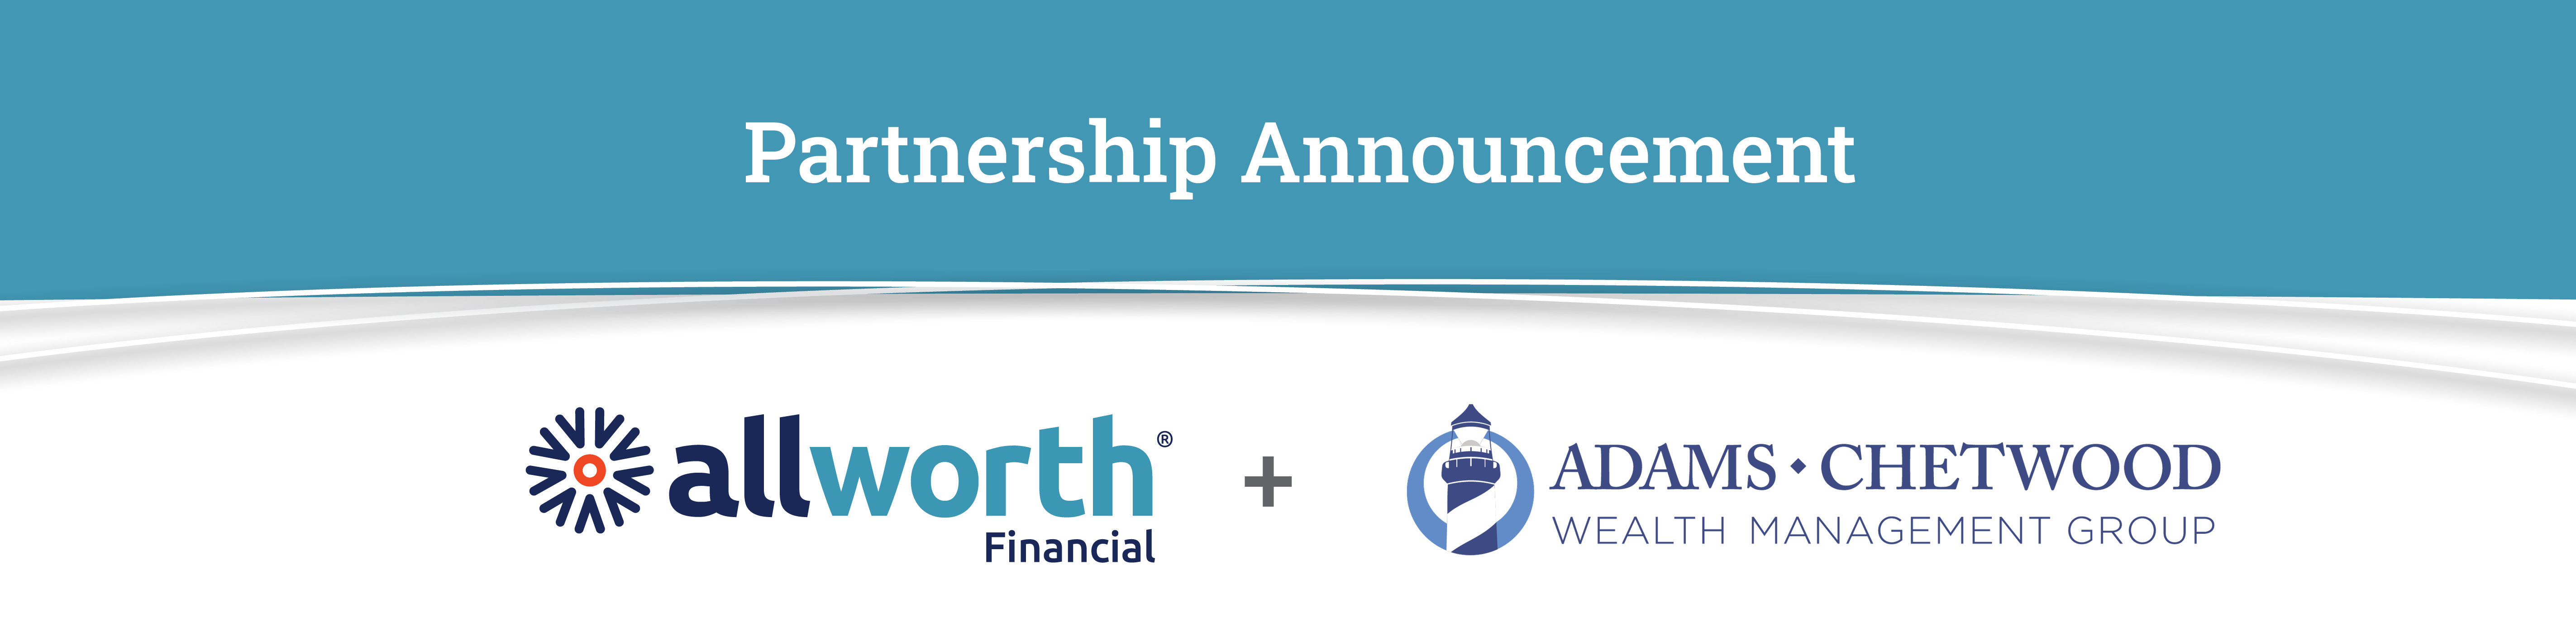 Partnership announcement for Allworth and Adams Chetwood Wealth Management Group, displaying both logos side-by-side